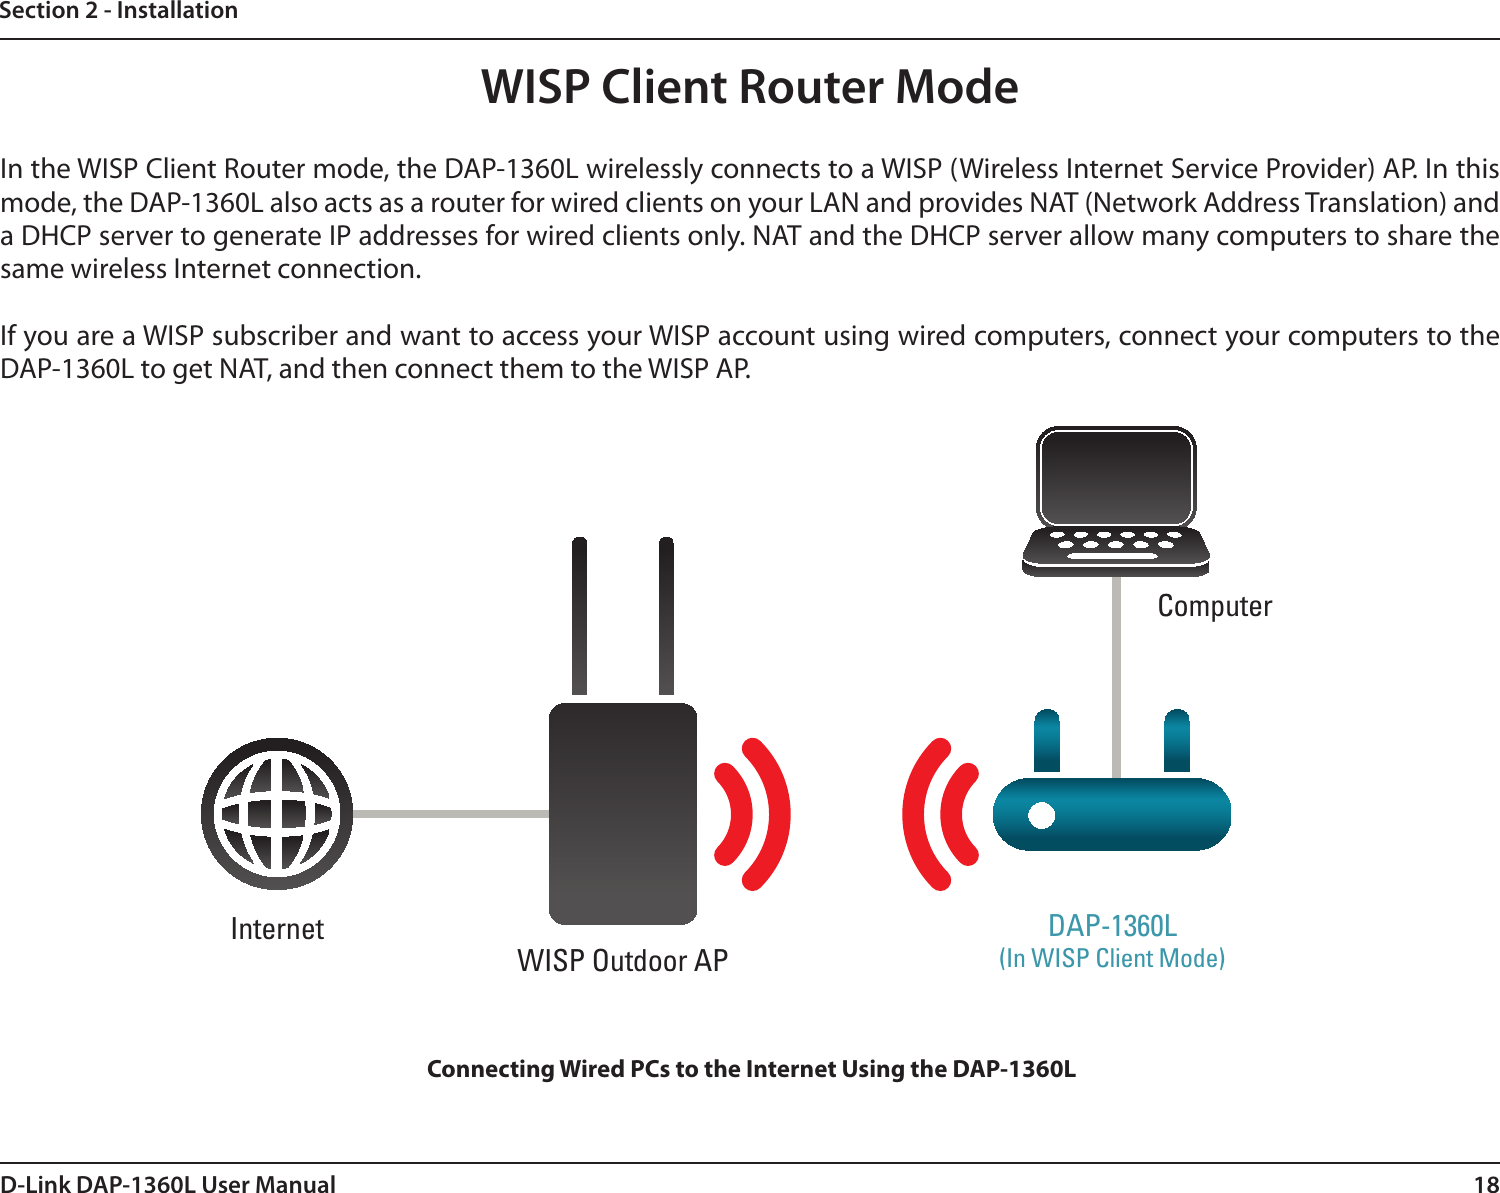 18D-Link DAP-1360L User ManualSection 2 - InstallationWISP Client Router ModeIn the WISP Client Router mode, the DAP-1360L wirelessly connects to a WISP (Wireless Internet Service Provider) AP. In this mode, the DAP-1360L also acts as a router for wired clients on your LAN and provides NAT (Network Address Translation) and a DHCP server to generate IP addresses for wired clients only. NAT and the DHCP server allow many computers to share the same wireless Internet connection.If you are a WISP subscriber and want to access your WISP account using wired computers, connect your computers to the DAP-1360L to get NAT, and then connect them to the WISP AP.InternetComputerDAP-1360L(In WISP Client Mode)WISP Outdoor APConnecting Wired PCs to the Internet Using the DAP-1360L